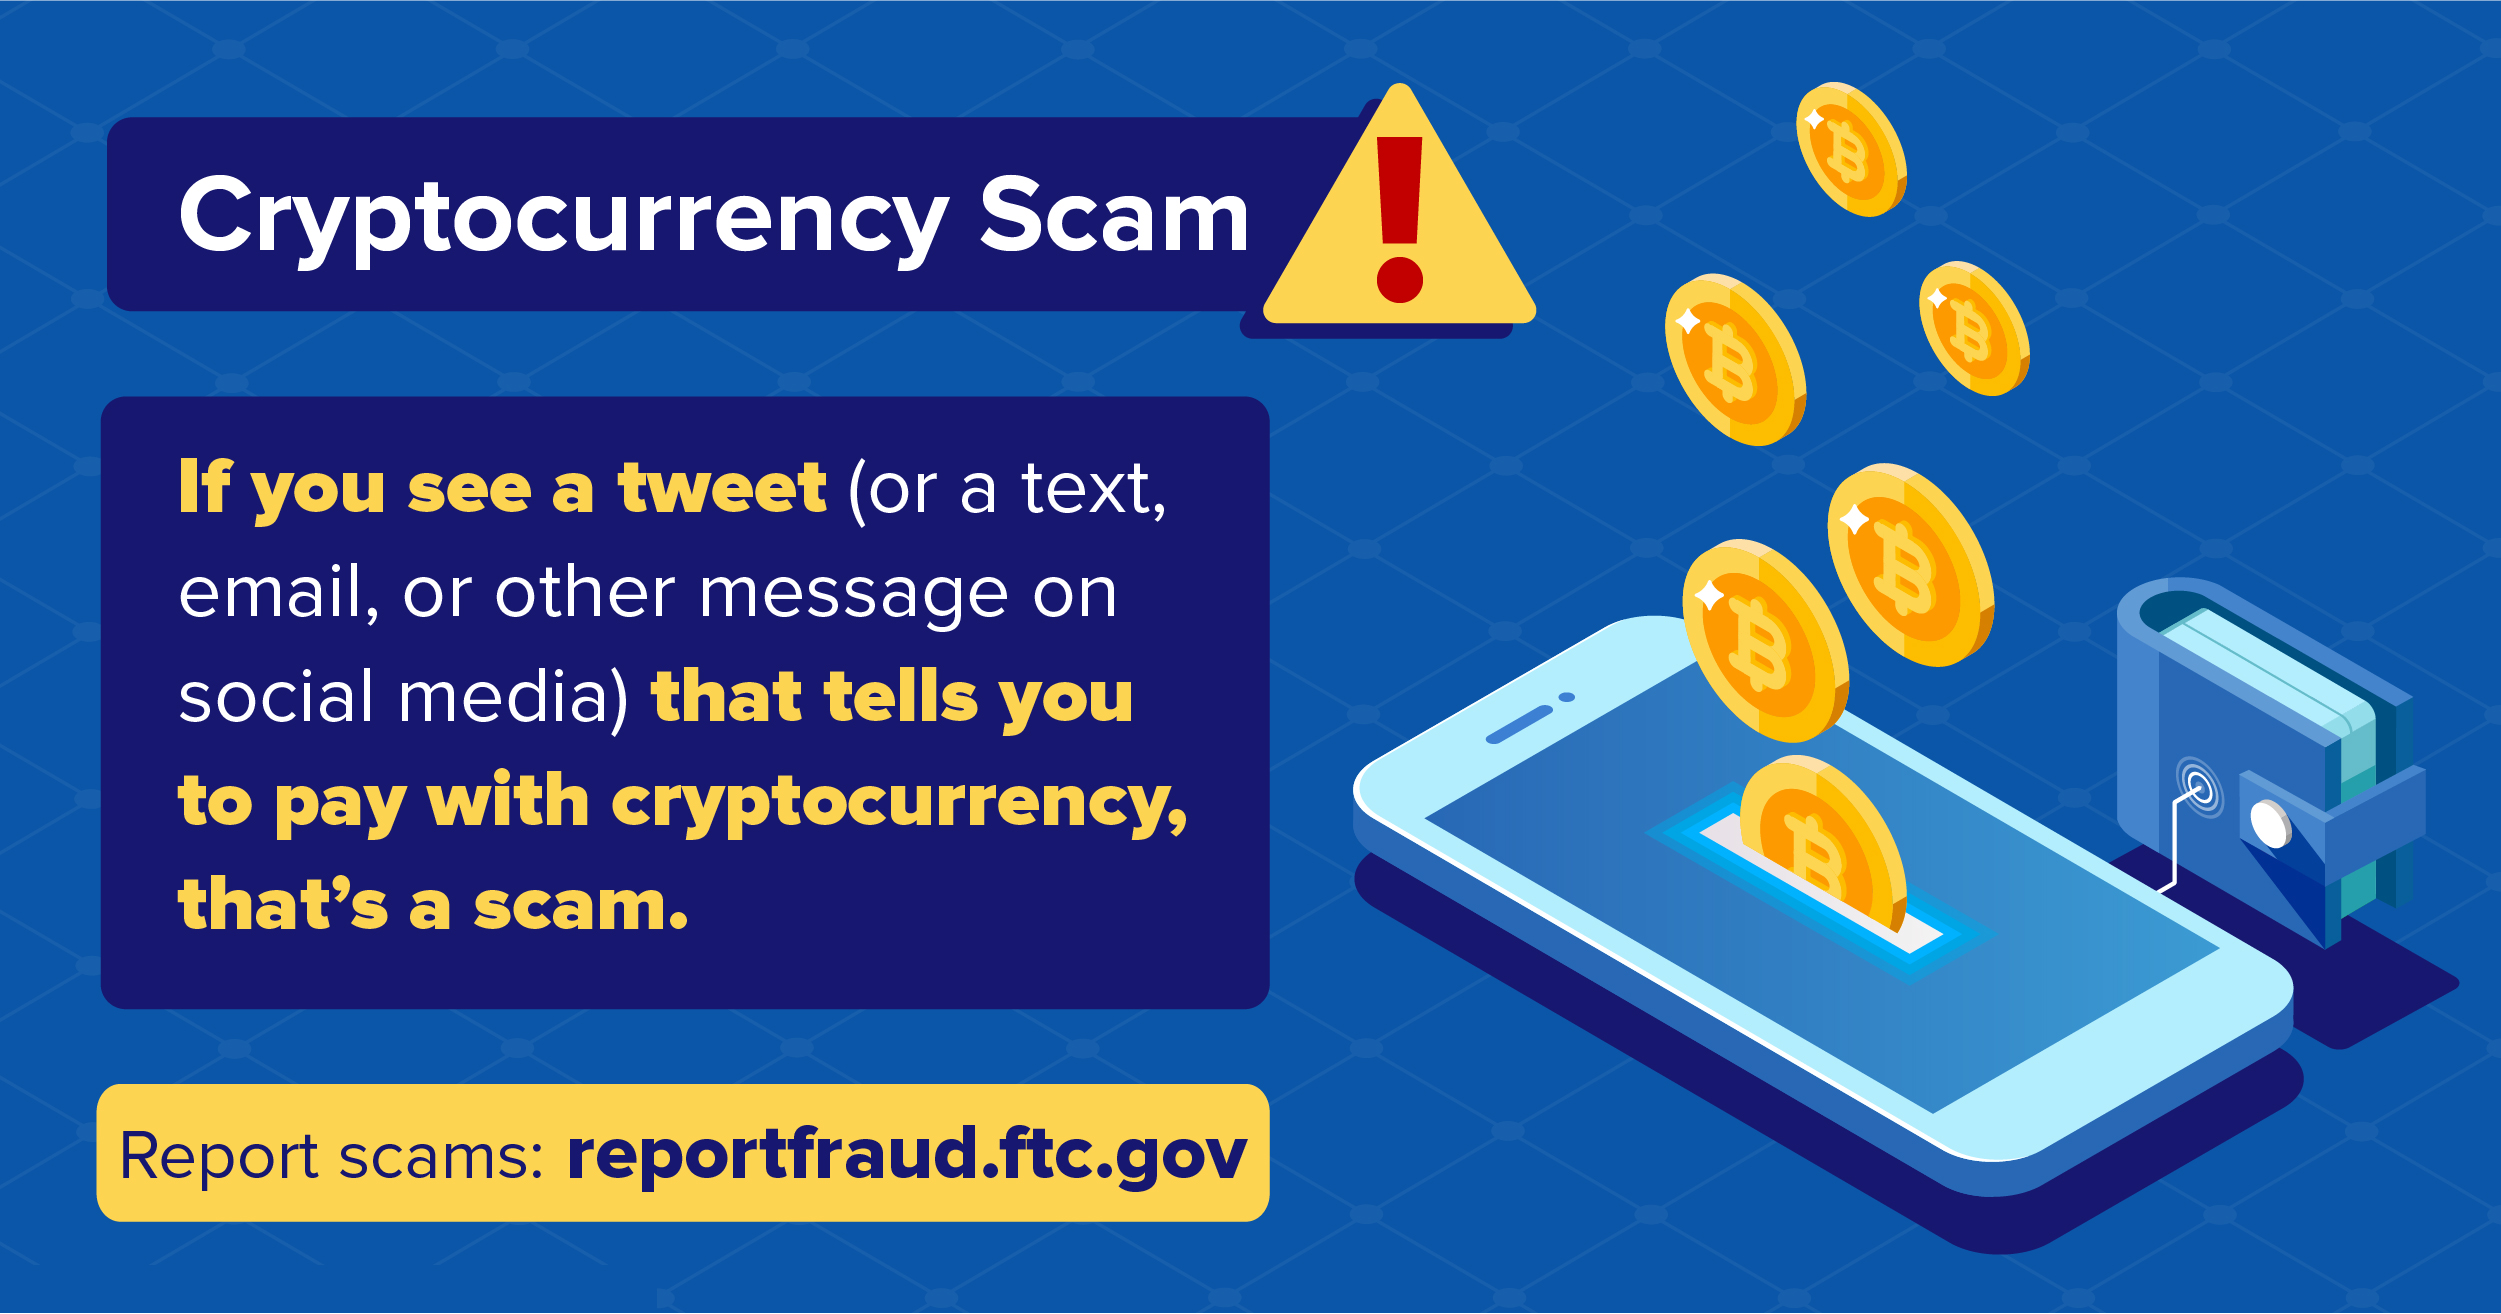 What To Know About Cryptocurrency and Scams | FTC Consumer Information